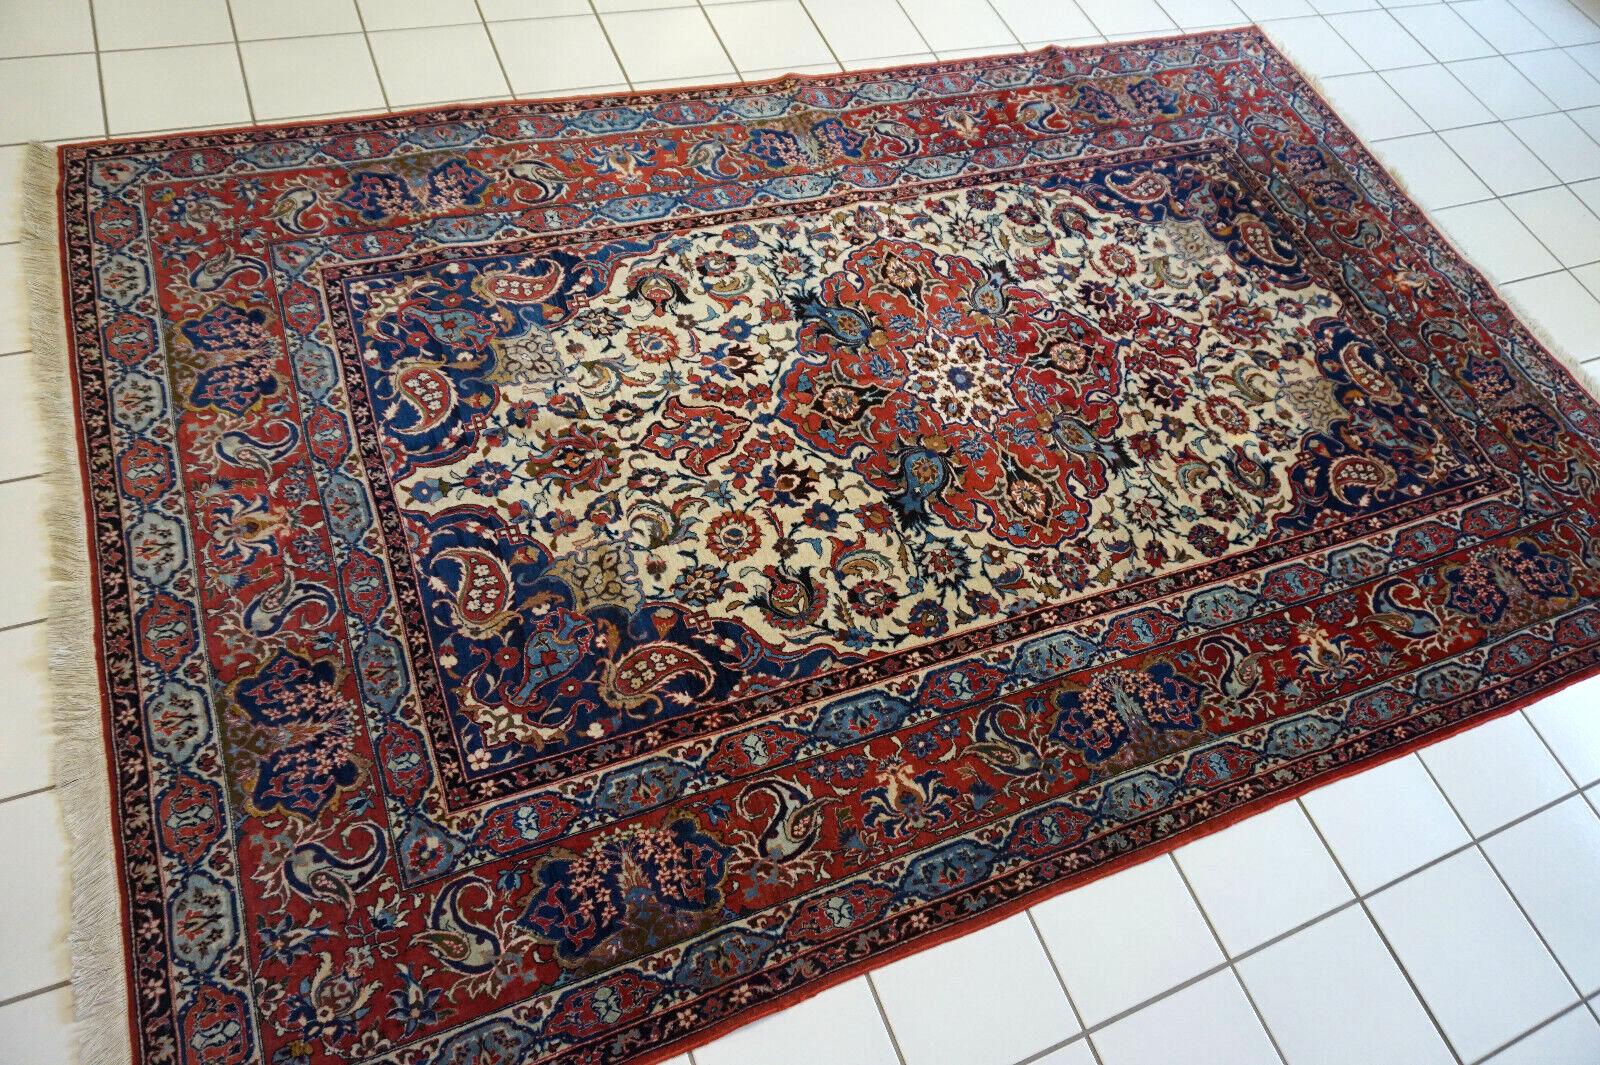 Early 20th Century Handmade Antique Persian Style Isfahan Rug 4.5' x 7.7', 1920s - 1D53 For Sale